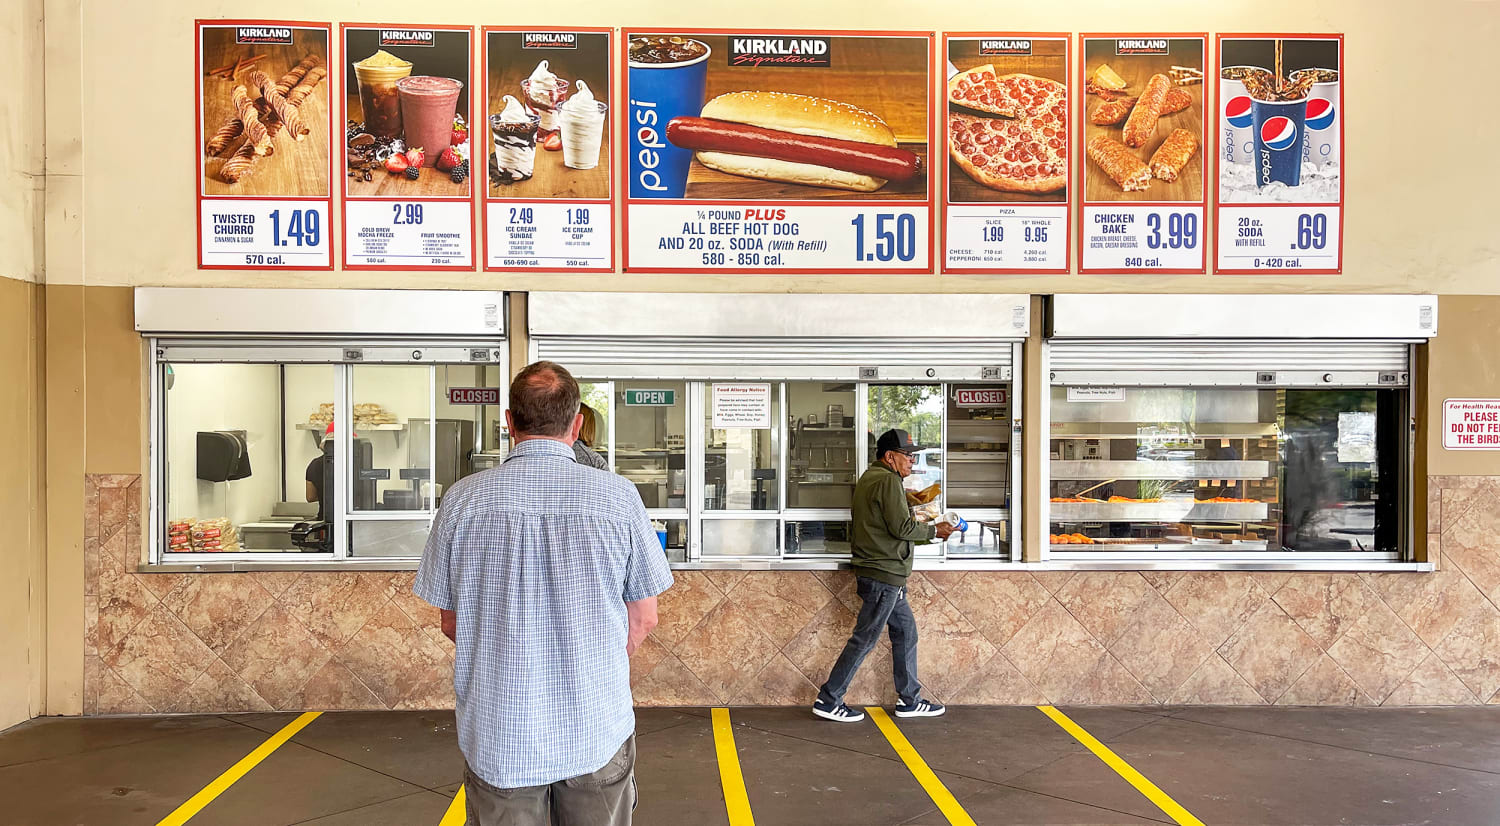 Non-members may no longer be able to get Costco’s iconic $1.50 hot dog combo